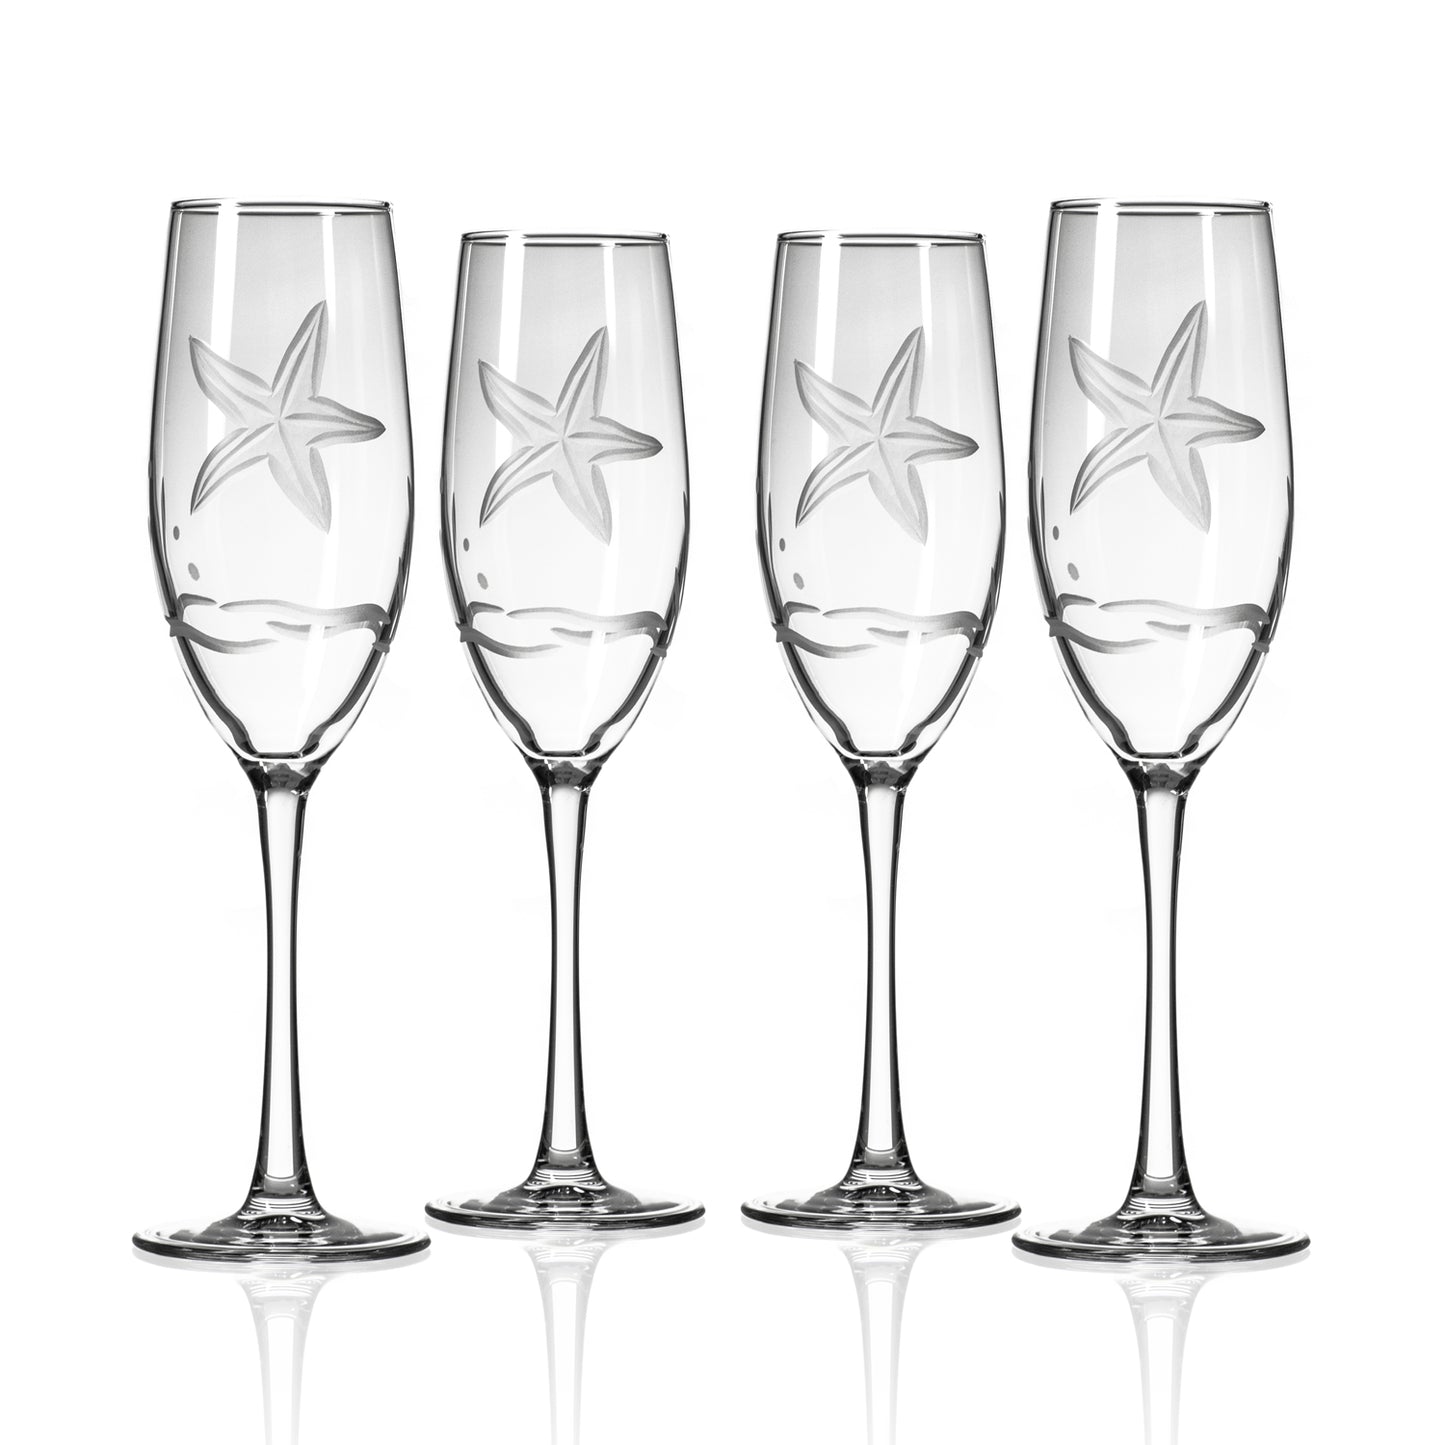 STARFISH 8OZ CHAMPAGNE FLUTE | SET OF 2 or 4